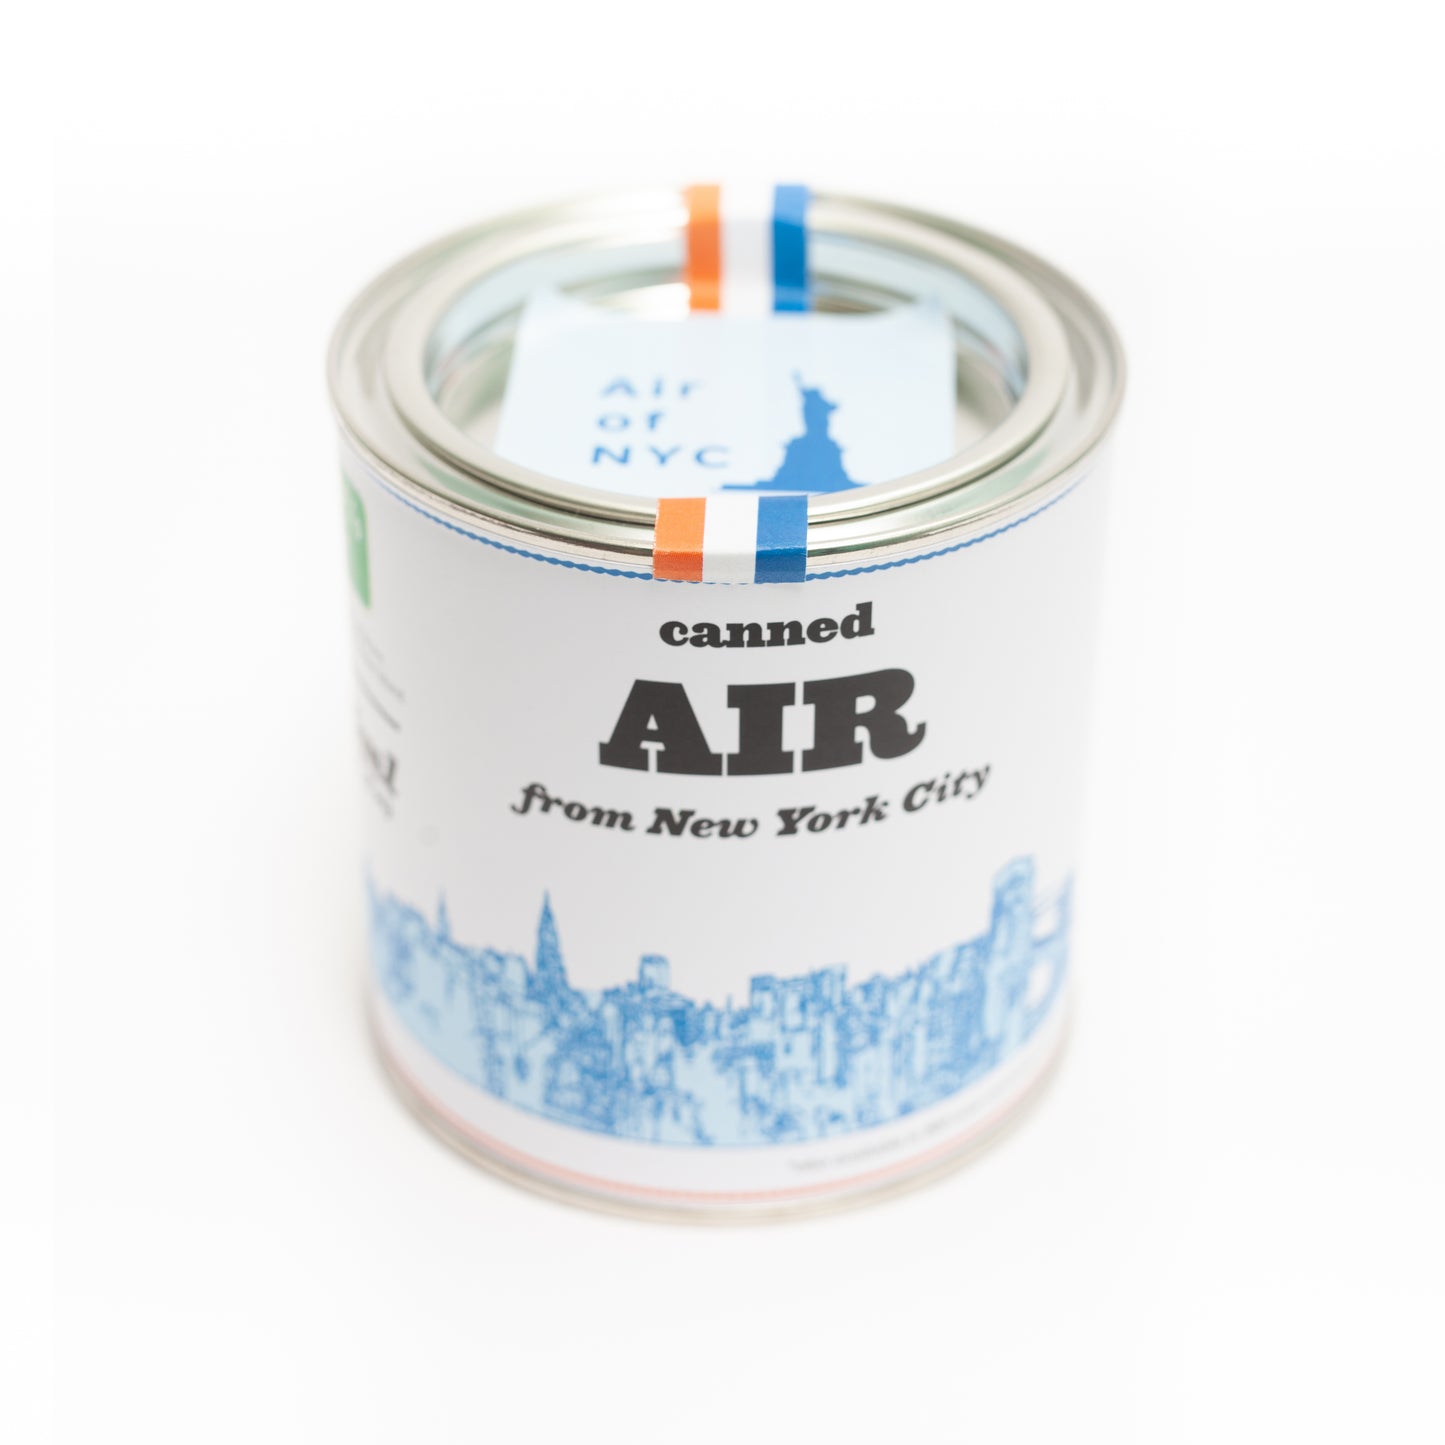 Original Canned Air from New York City